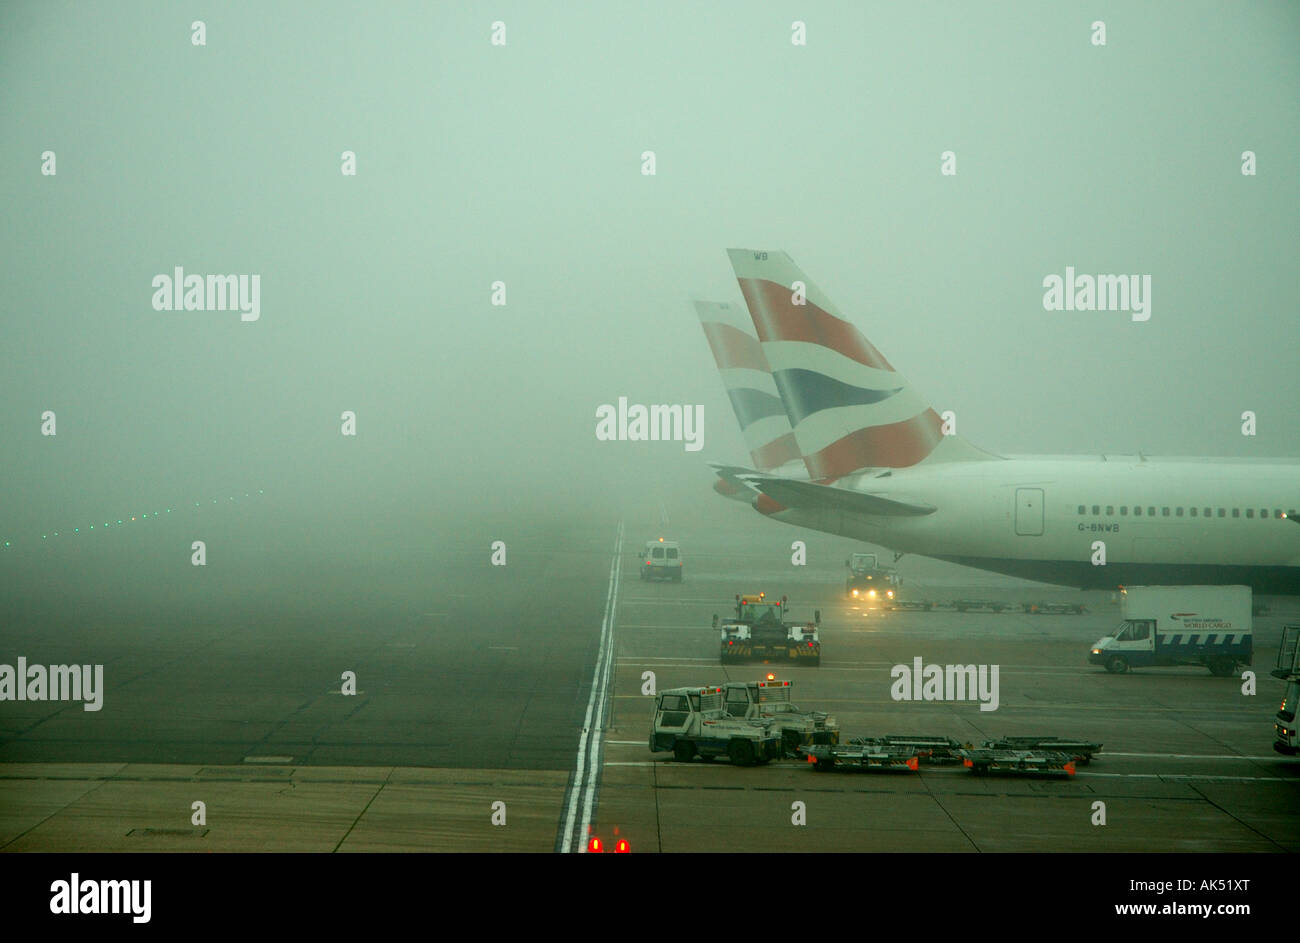 British Airways plane grounded due to heavy fog at heathrow airport Stock Photo